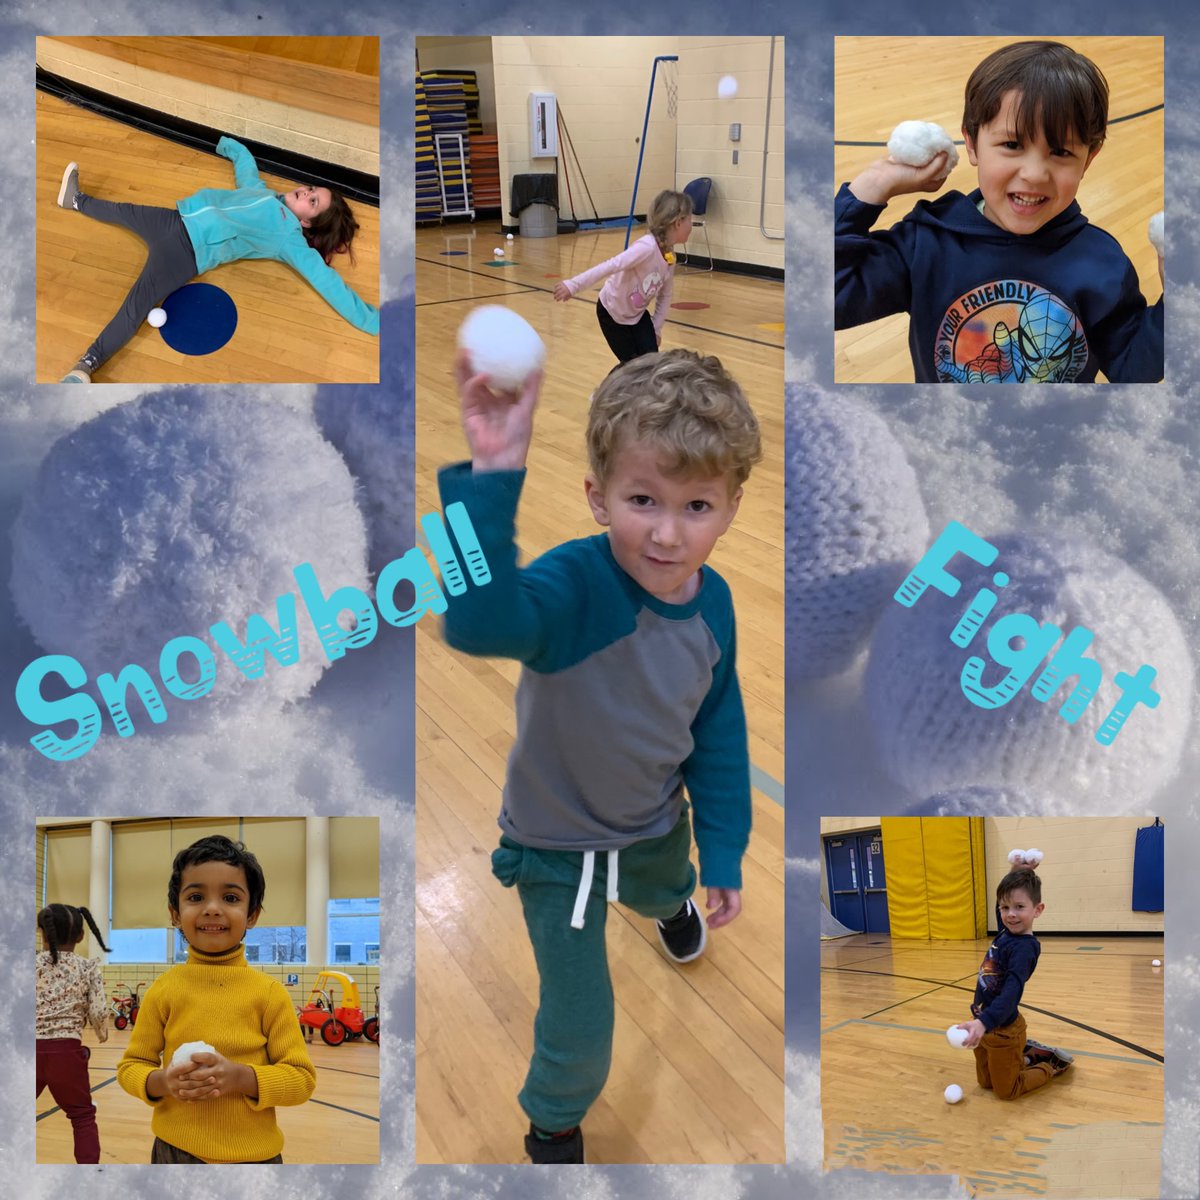 When there’s no snow outside, we bring the snowball fight inside! 20 snow angels were the payment for getting snow tagged. What a fun way to exercise! #shadesofdevelopment #knoxvilleafterschool #SHADES #afterschoolalliance #eastTNafterachool #afterschoolfun #lightsonafterschool